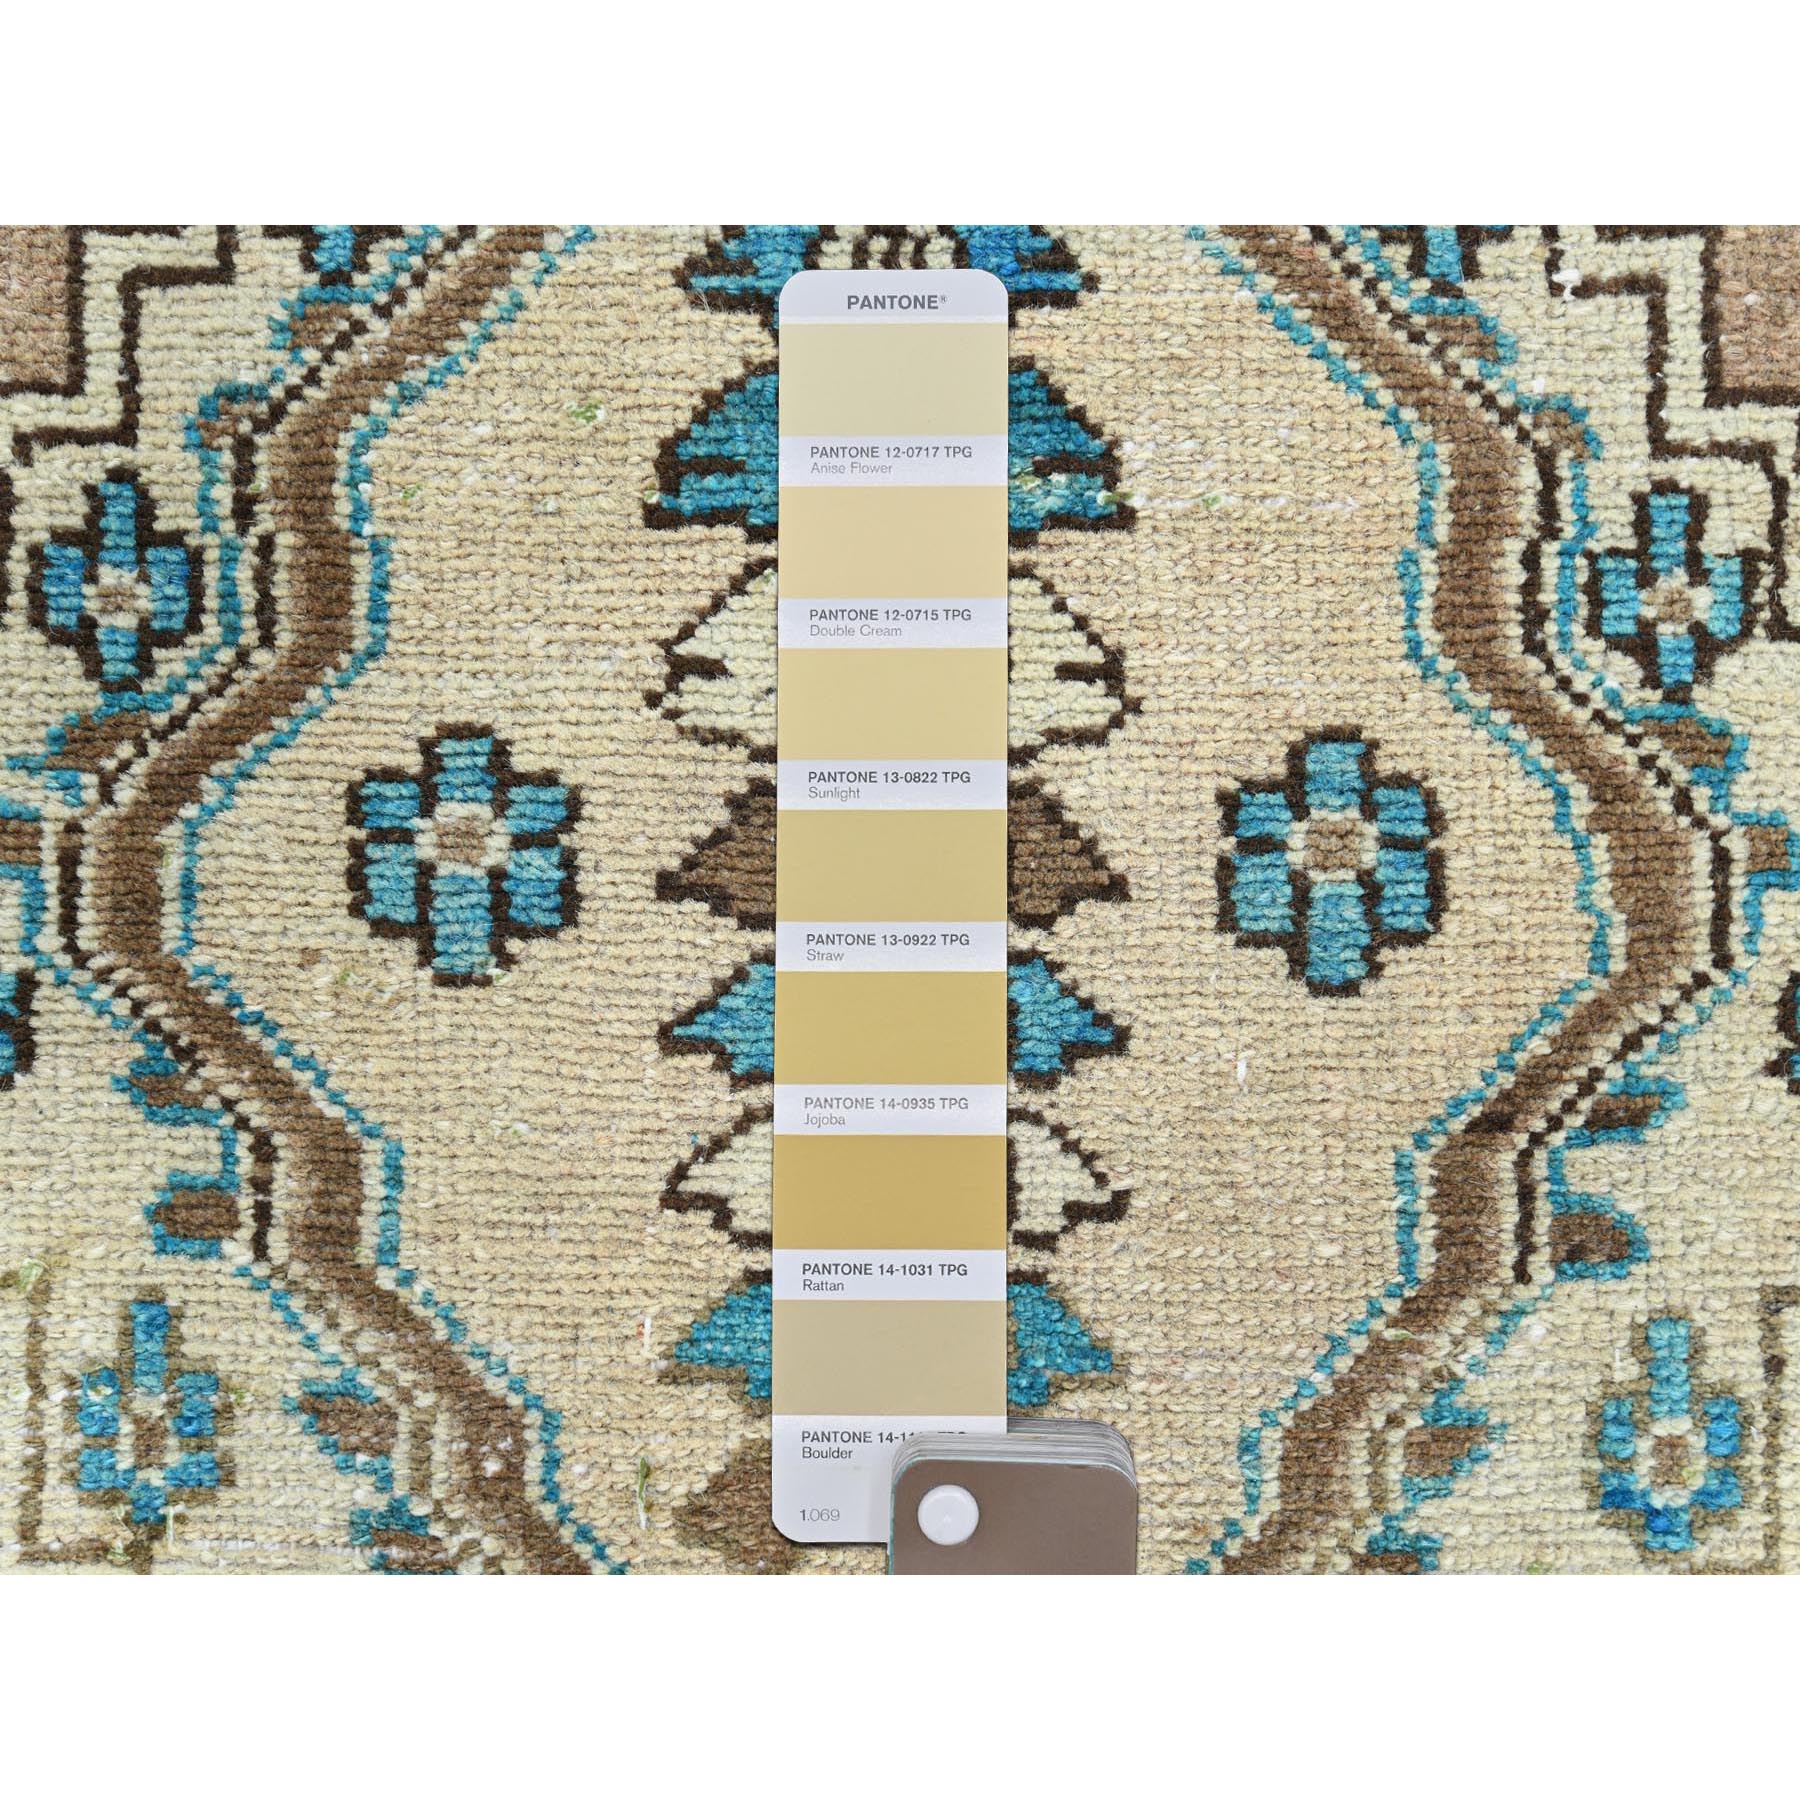 3'x9'4" Camel Hair Vintage Persian Hamadan with Unique Open Field Design, Sheared Low, Hand Woven Pure Wool, Distressed Wide Runner Oriental Rug 